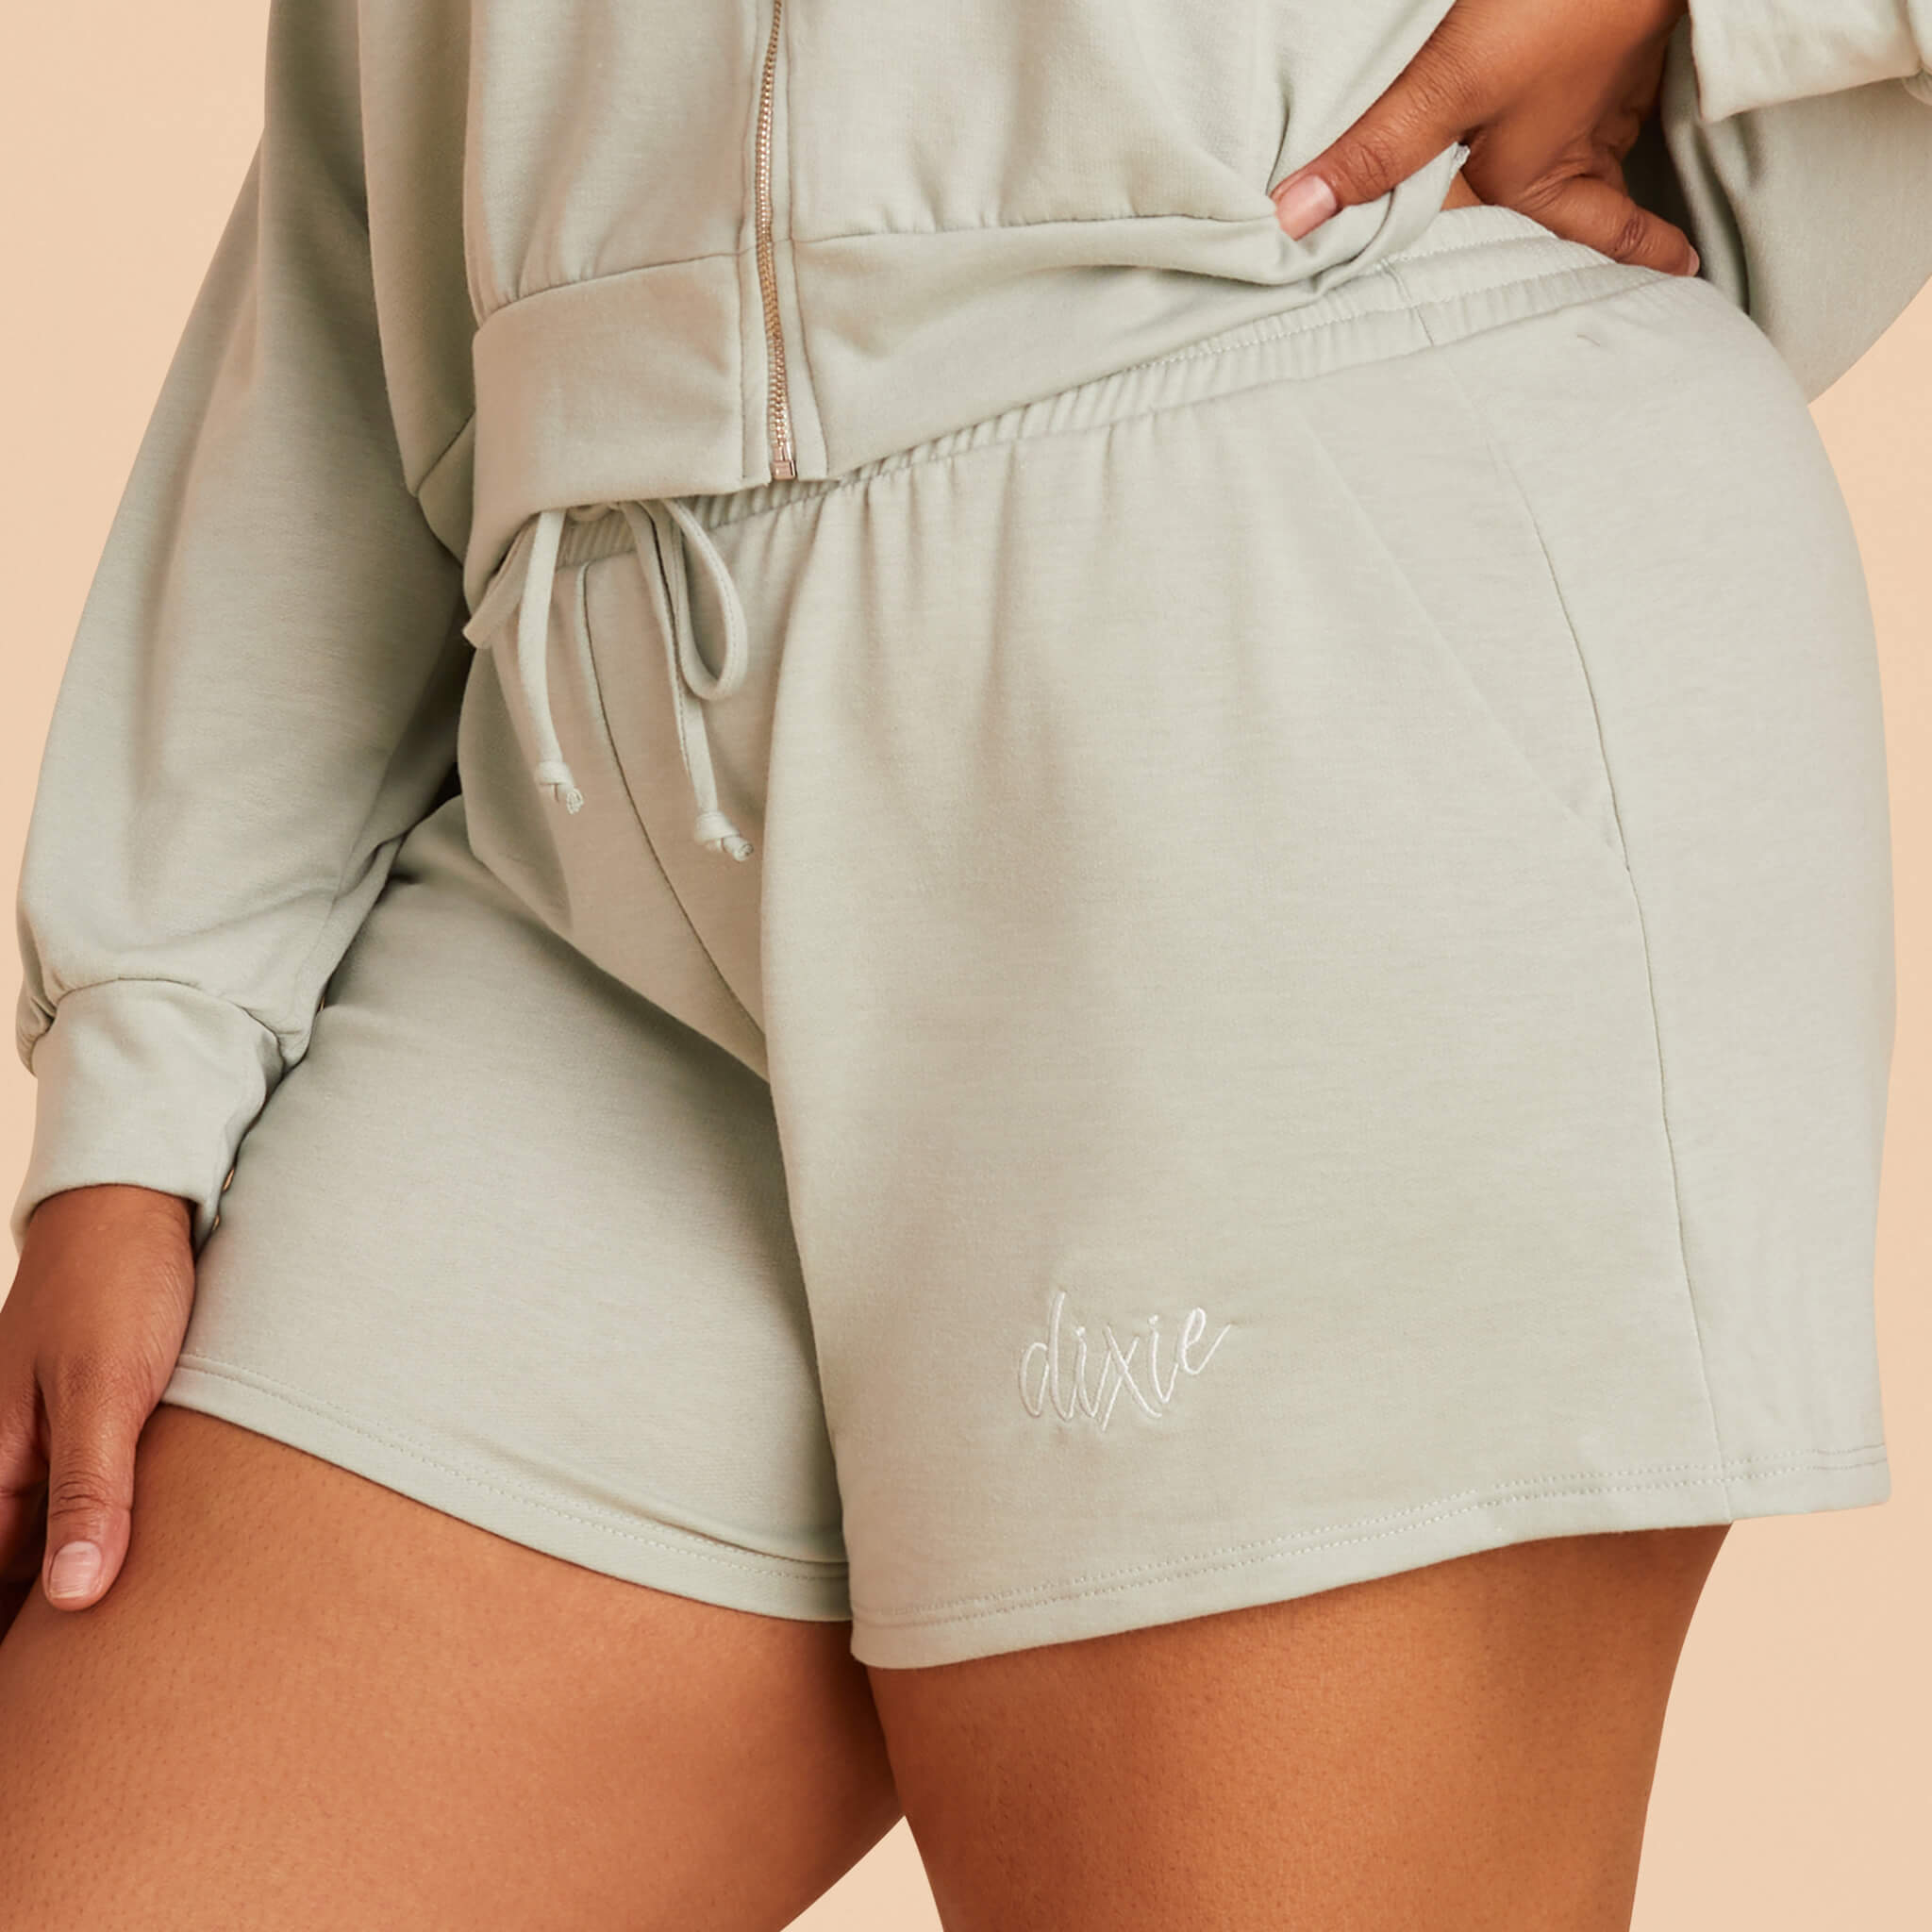 Plus Size sweat shorts in Sage Light Green with personalization